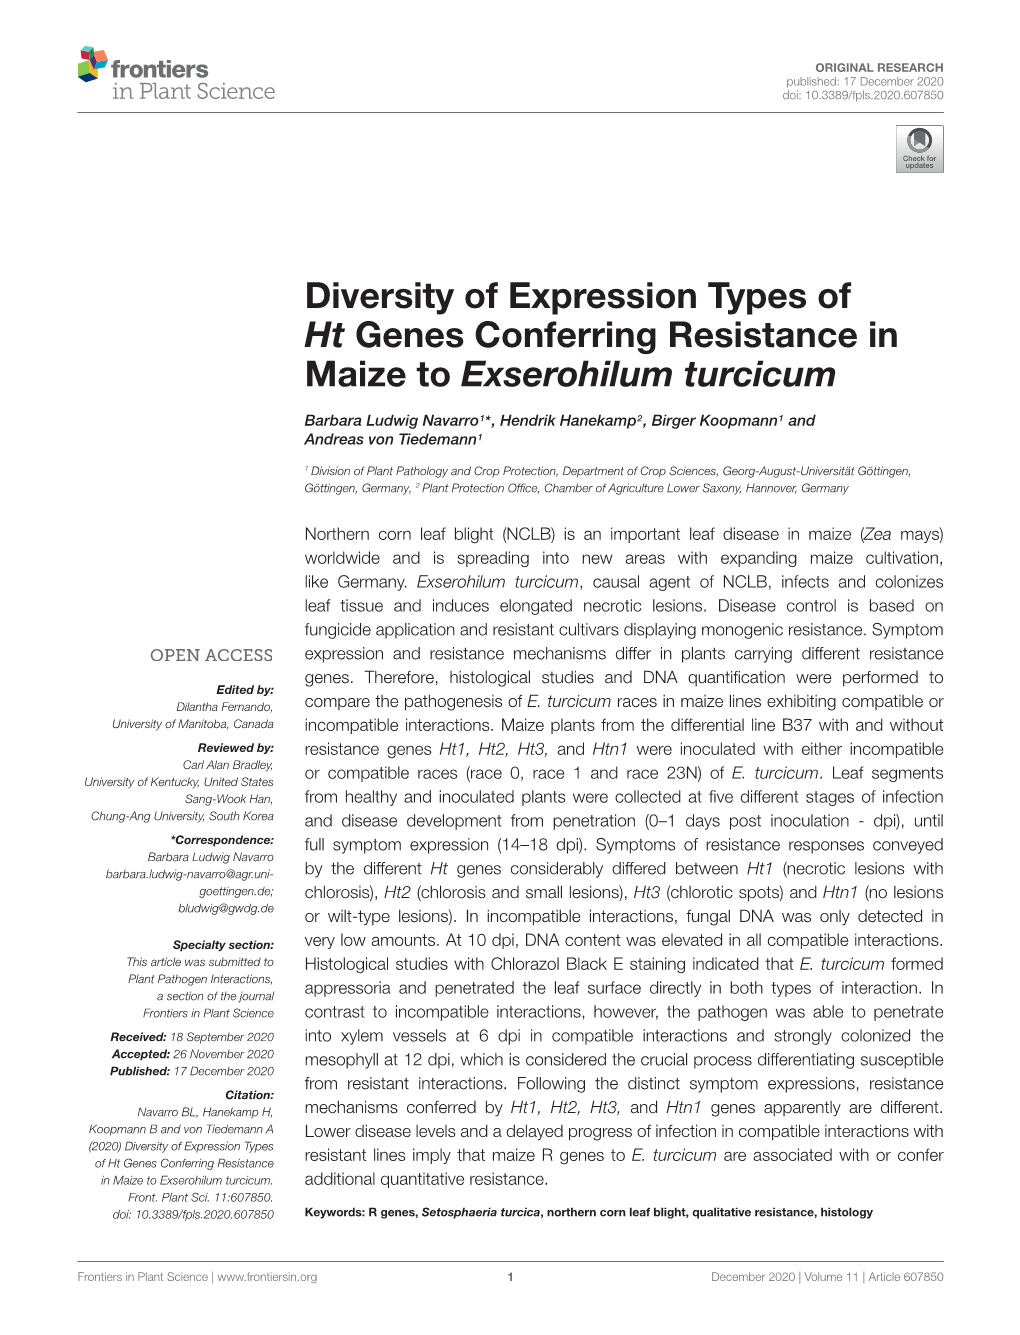 Diversity of Expression Types of Ht Genes Conferring Resistance in Maize to Exserohilum Turcicum